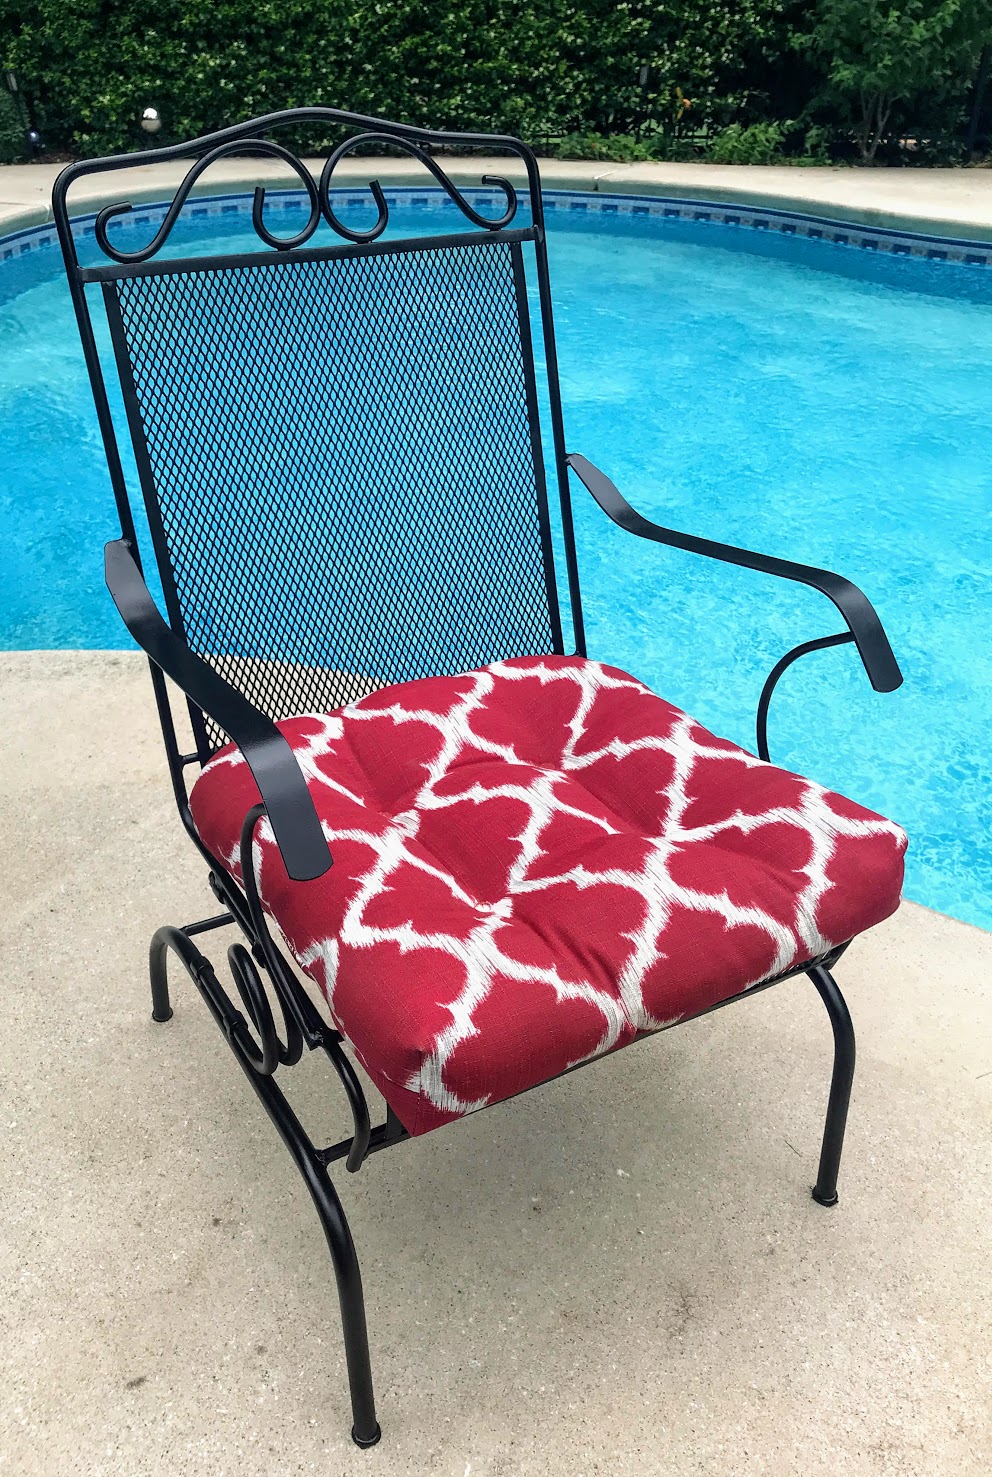 patio dining chairs